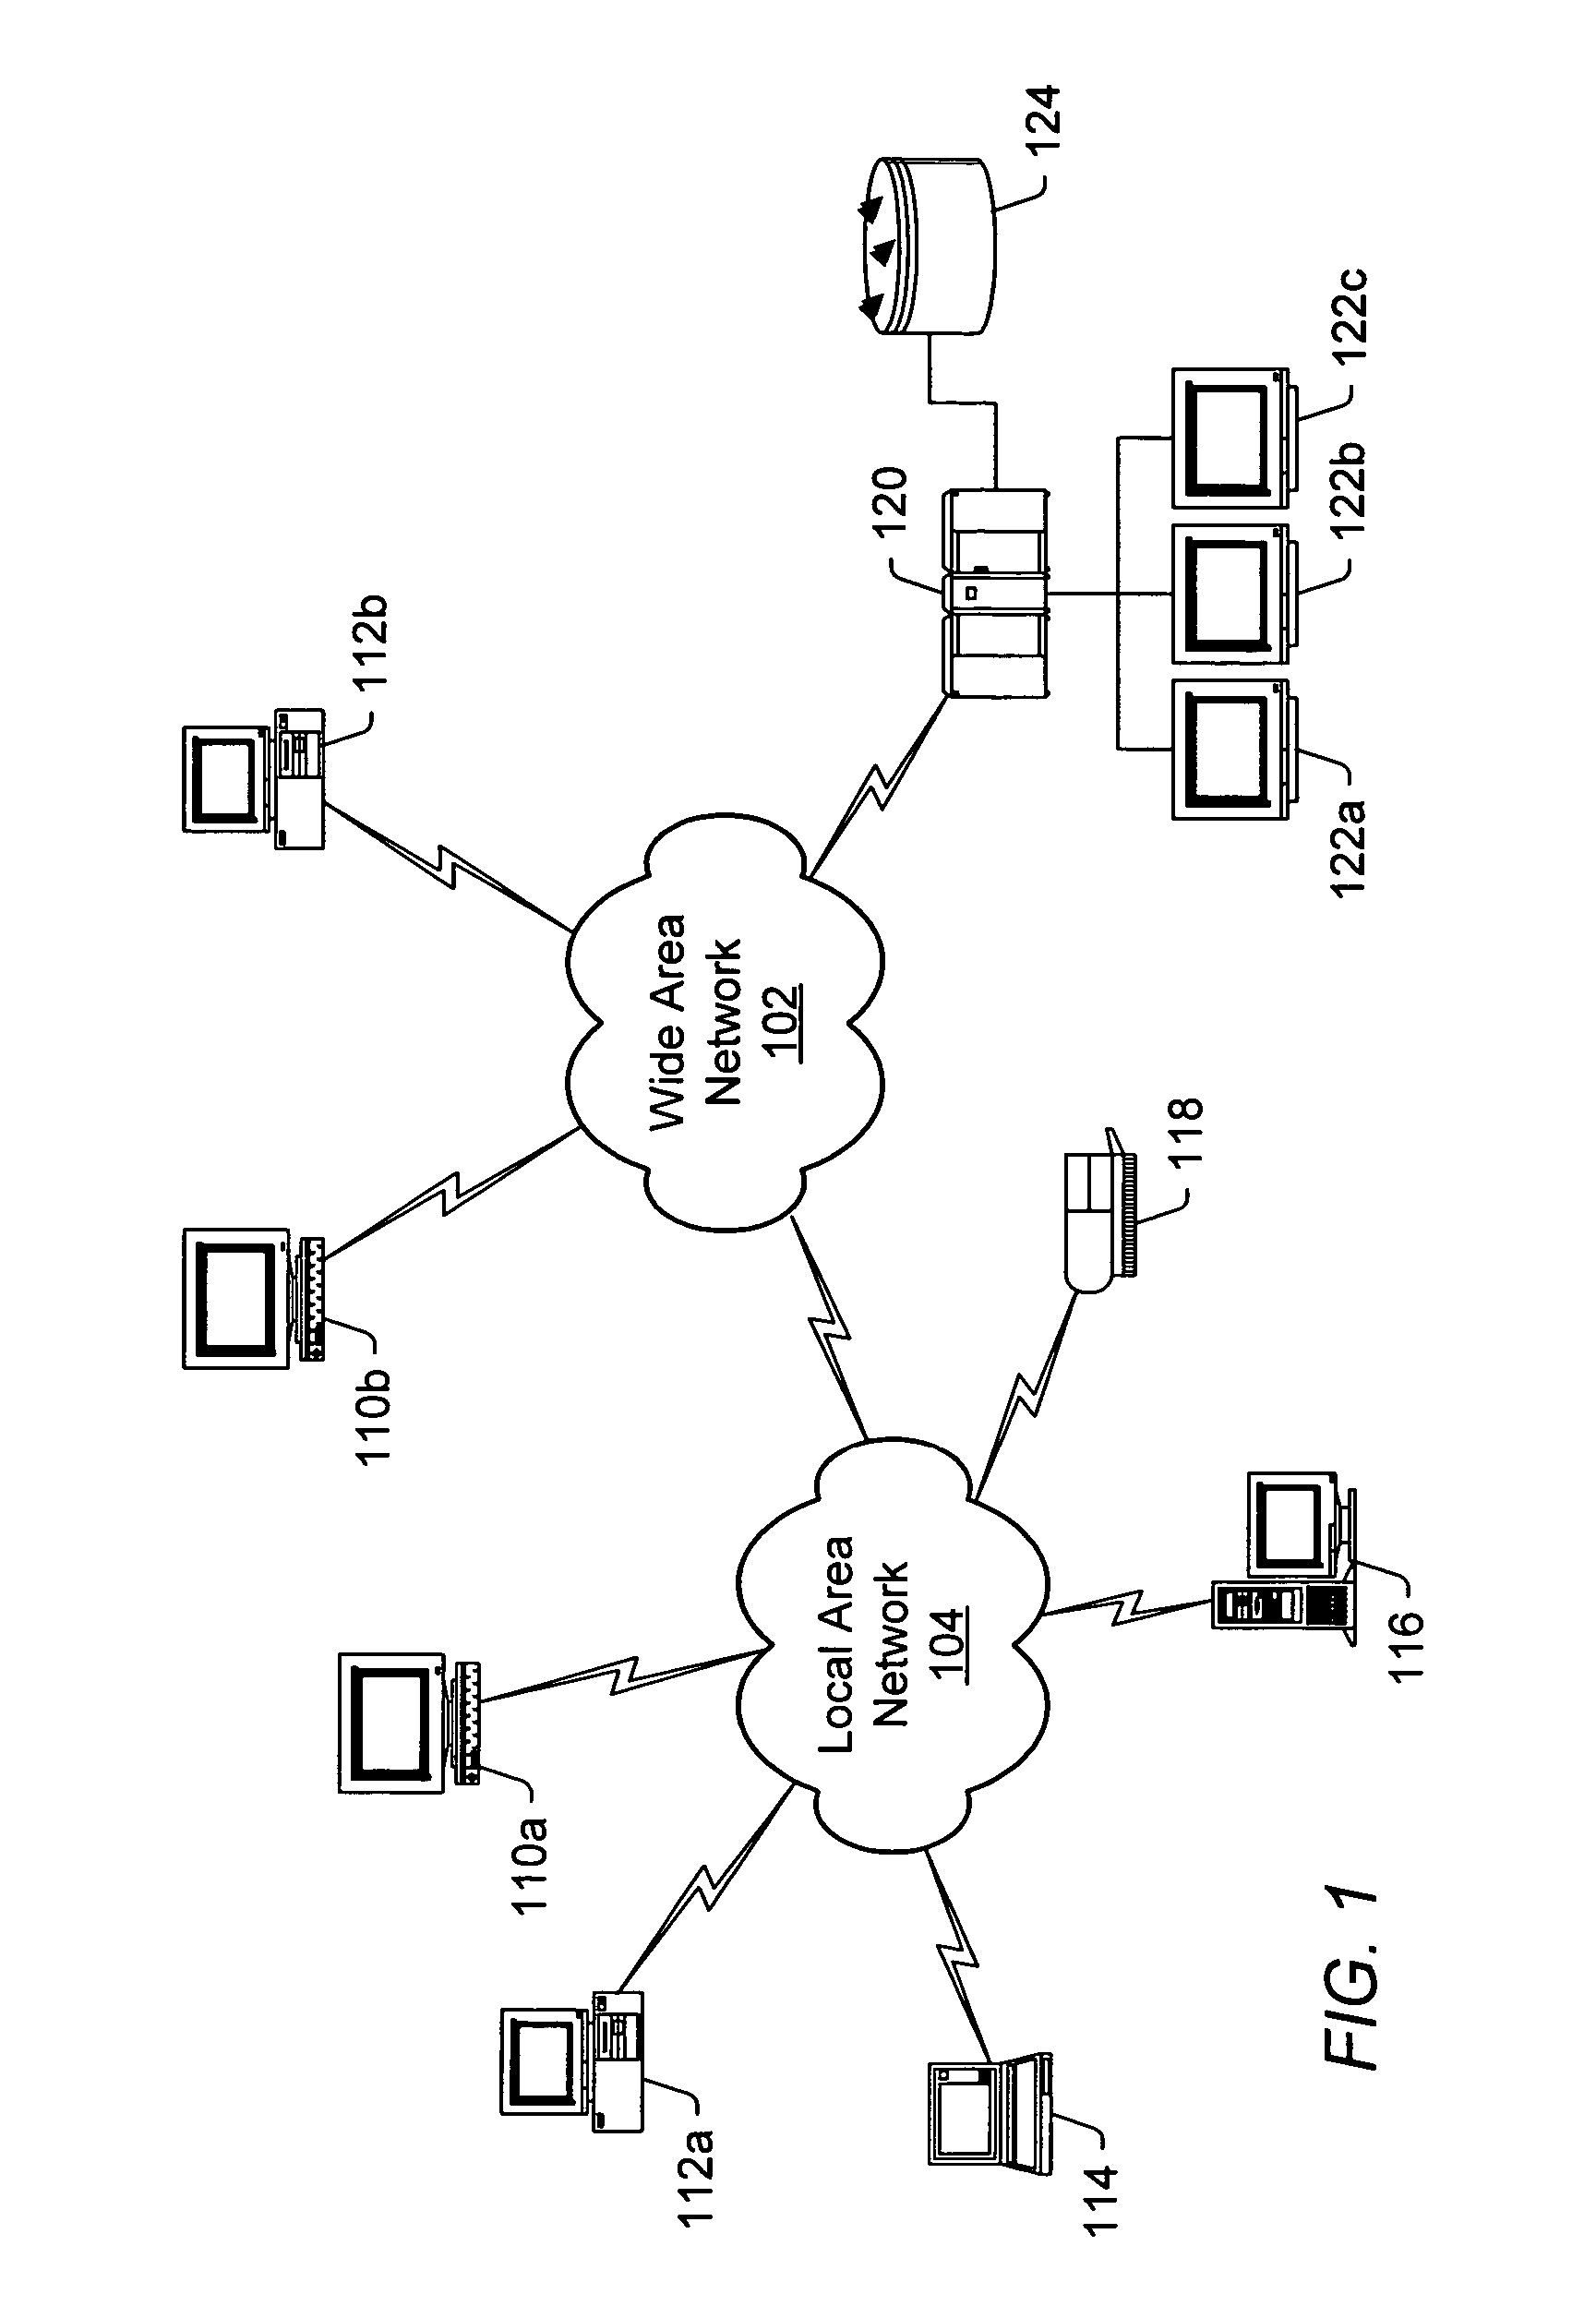 Systems and methods for diagram data collection